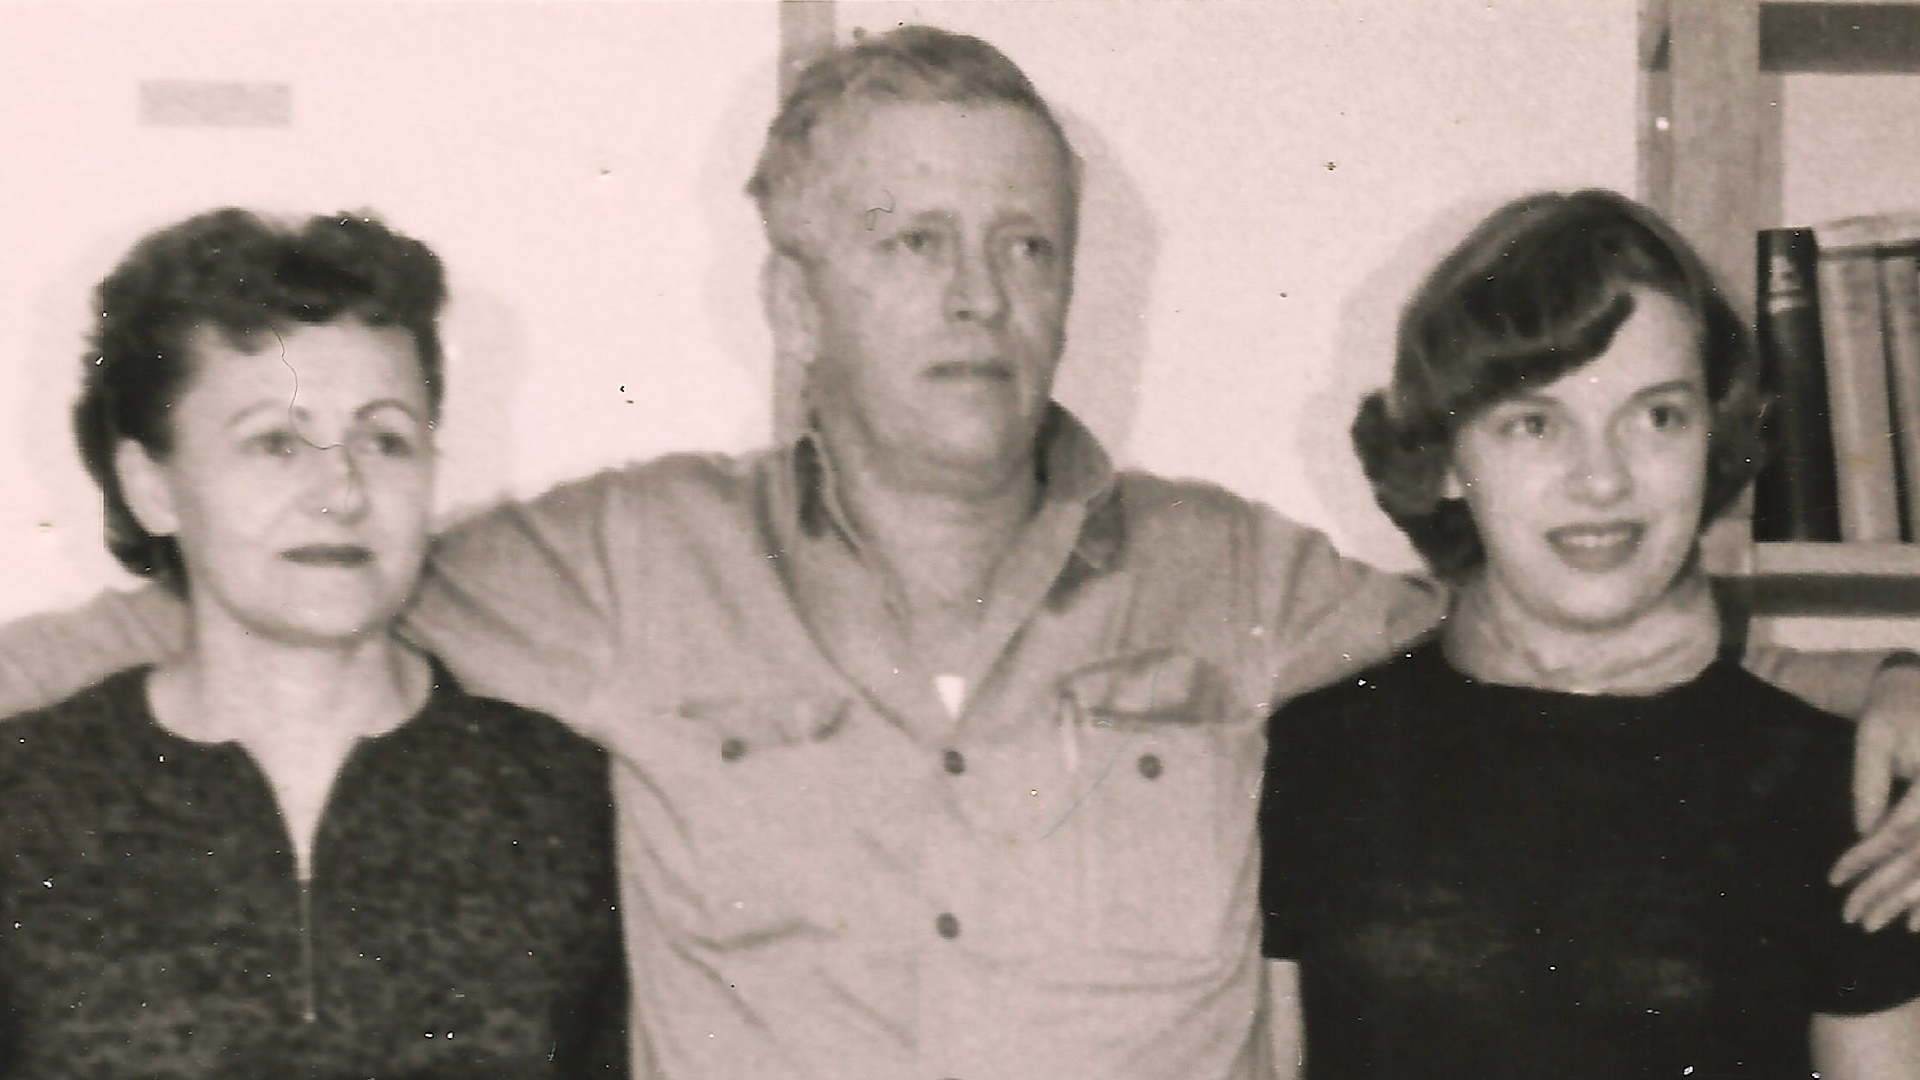 This picture shows John Fuller with his wife and daughter from 1955.